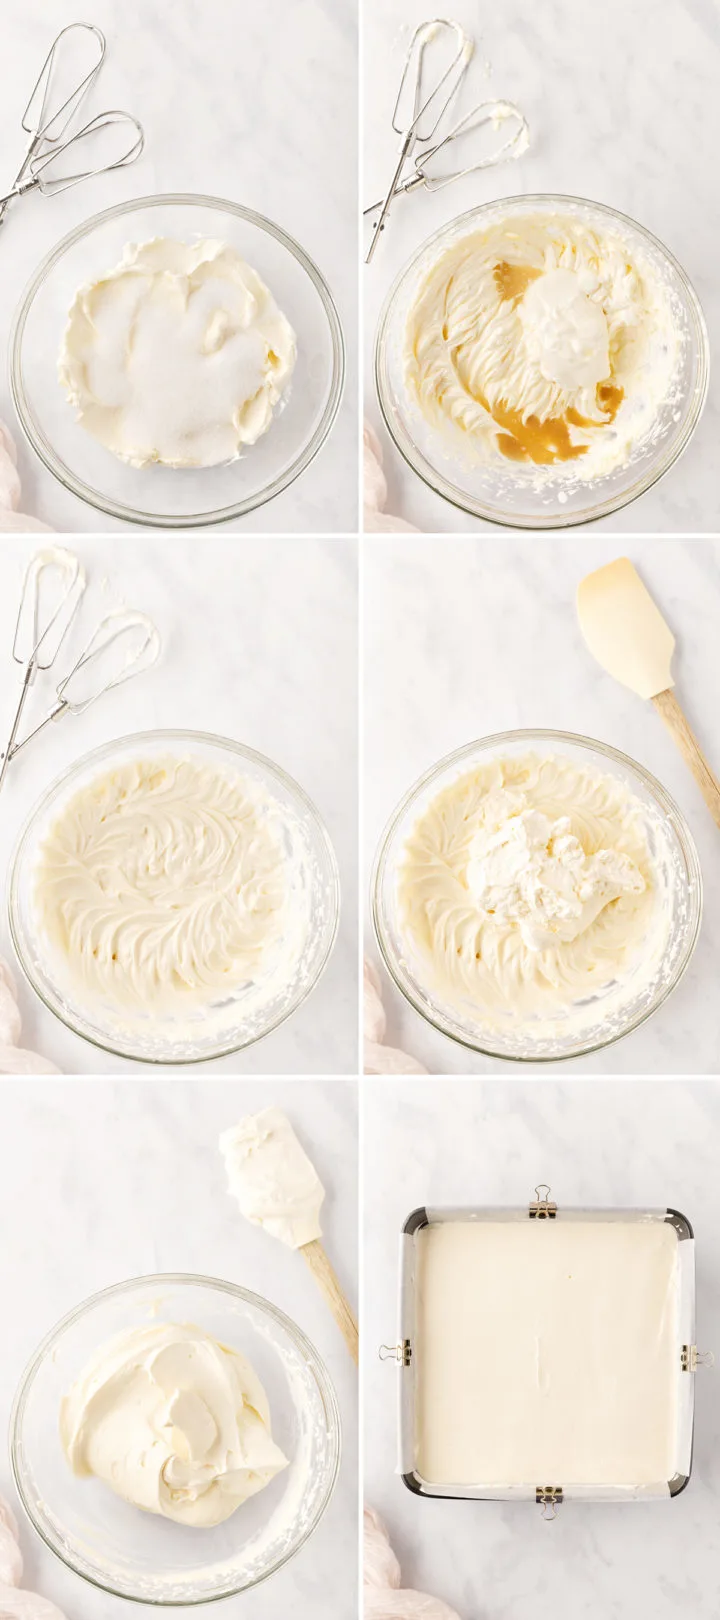 step by step photos showing how to make cheesecake filling for cheesecake bars